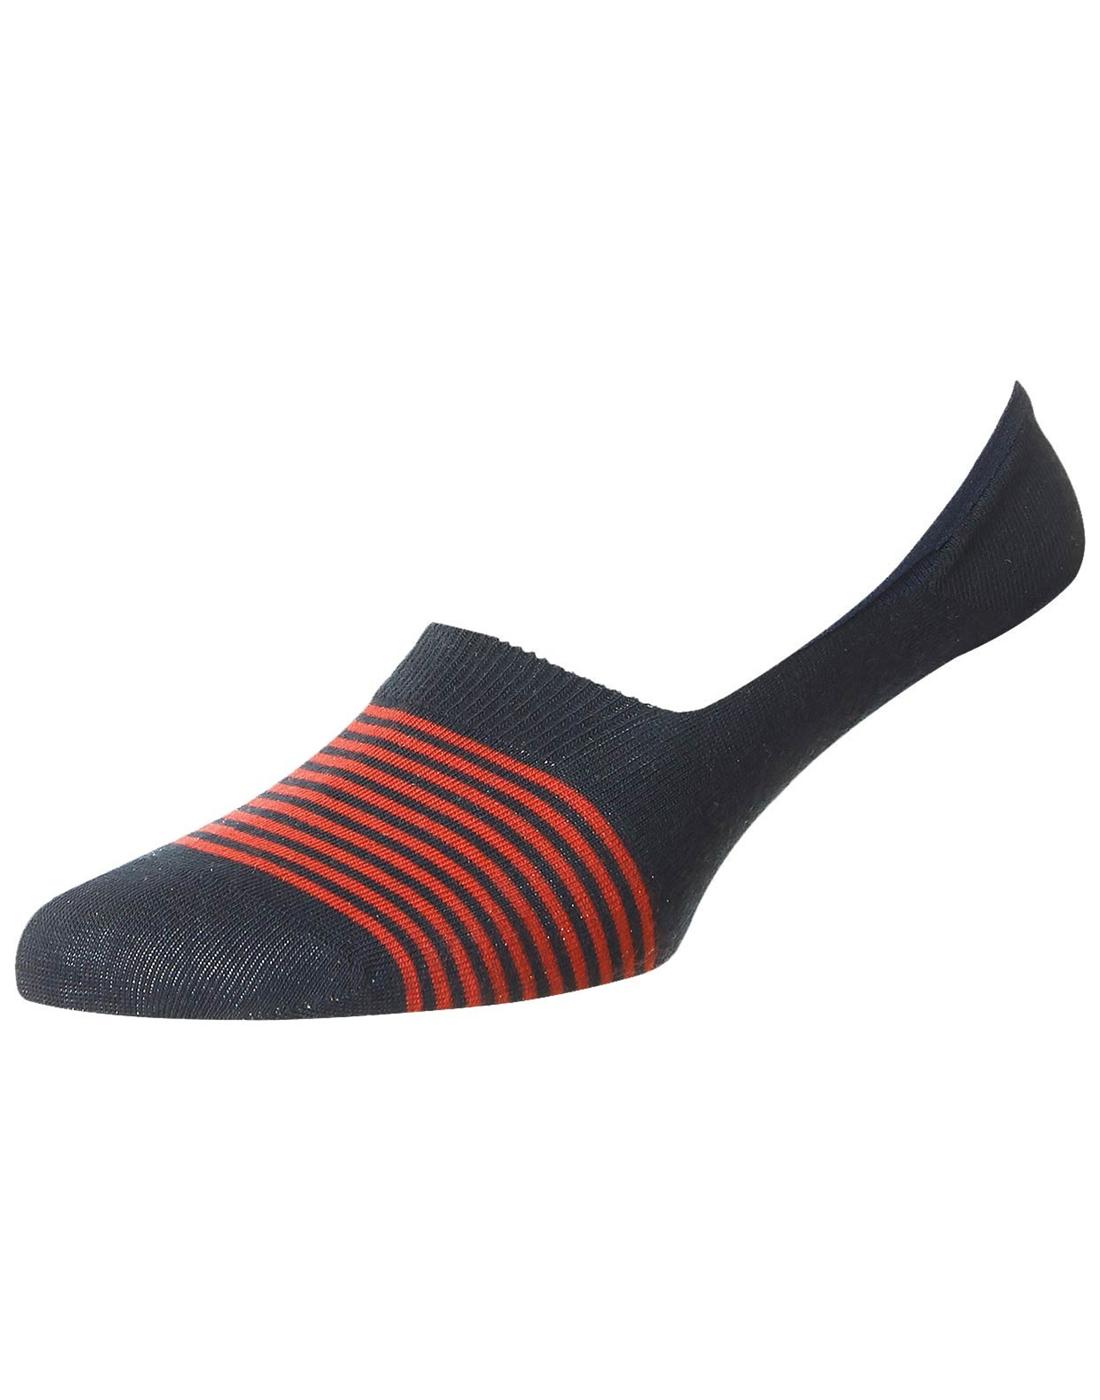 Pantherella Invisible Loafer Socks in Navy Stripe